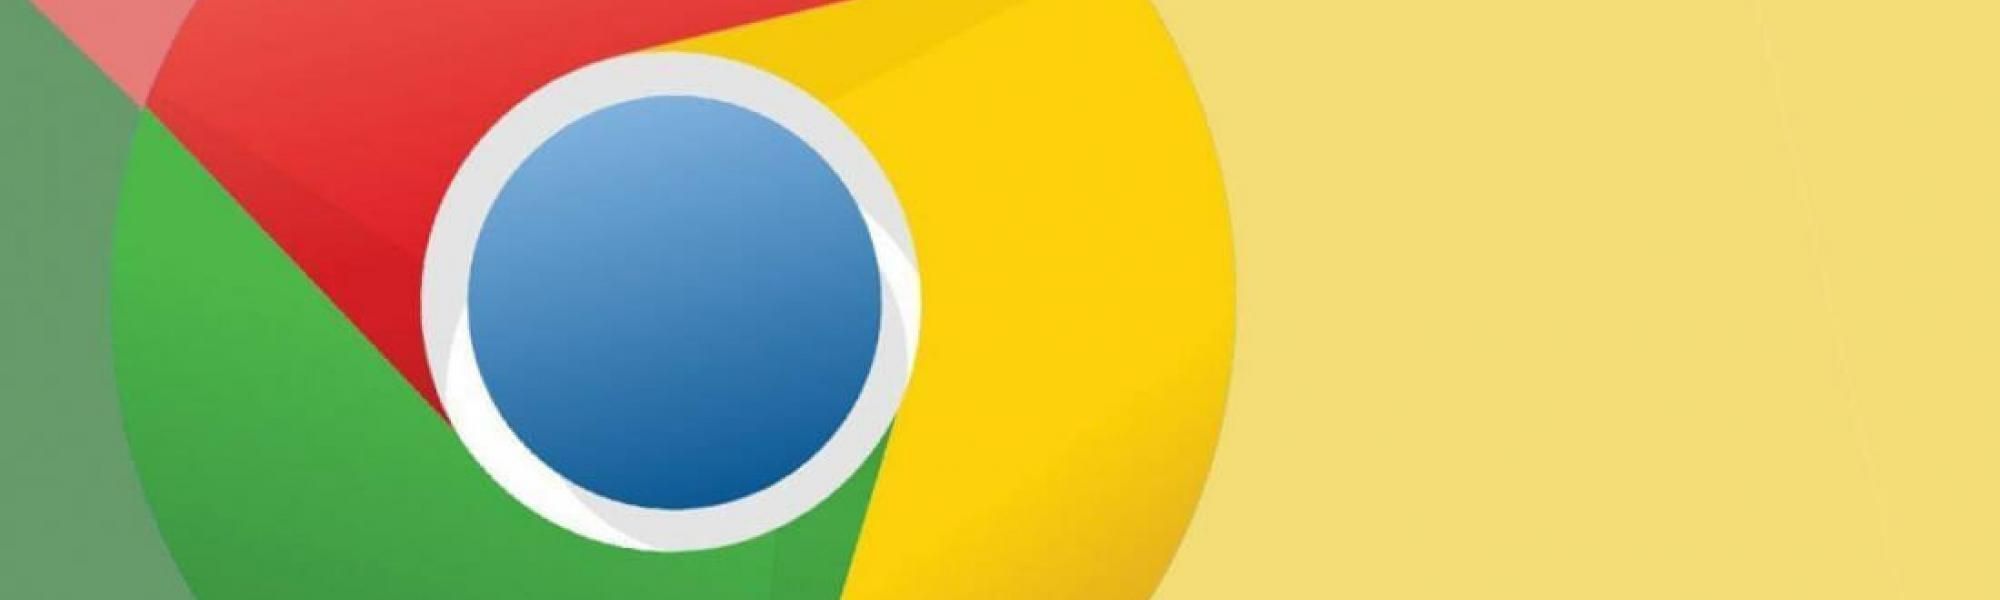 Chrome Insecure Banner - Banishment